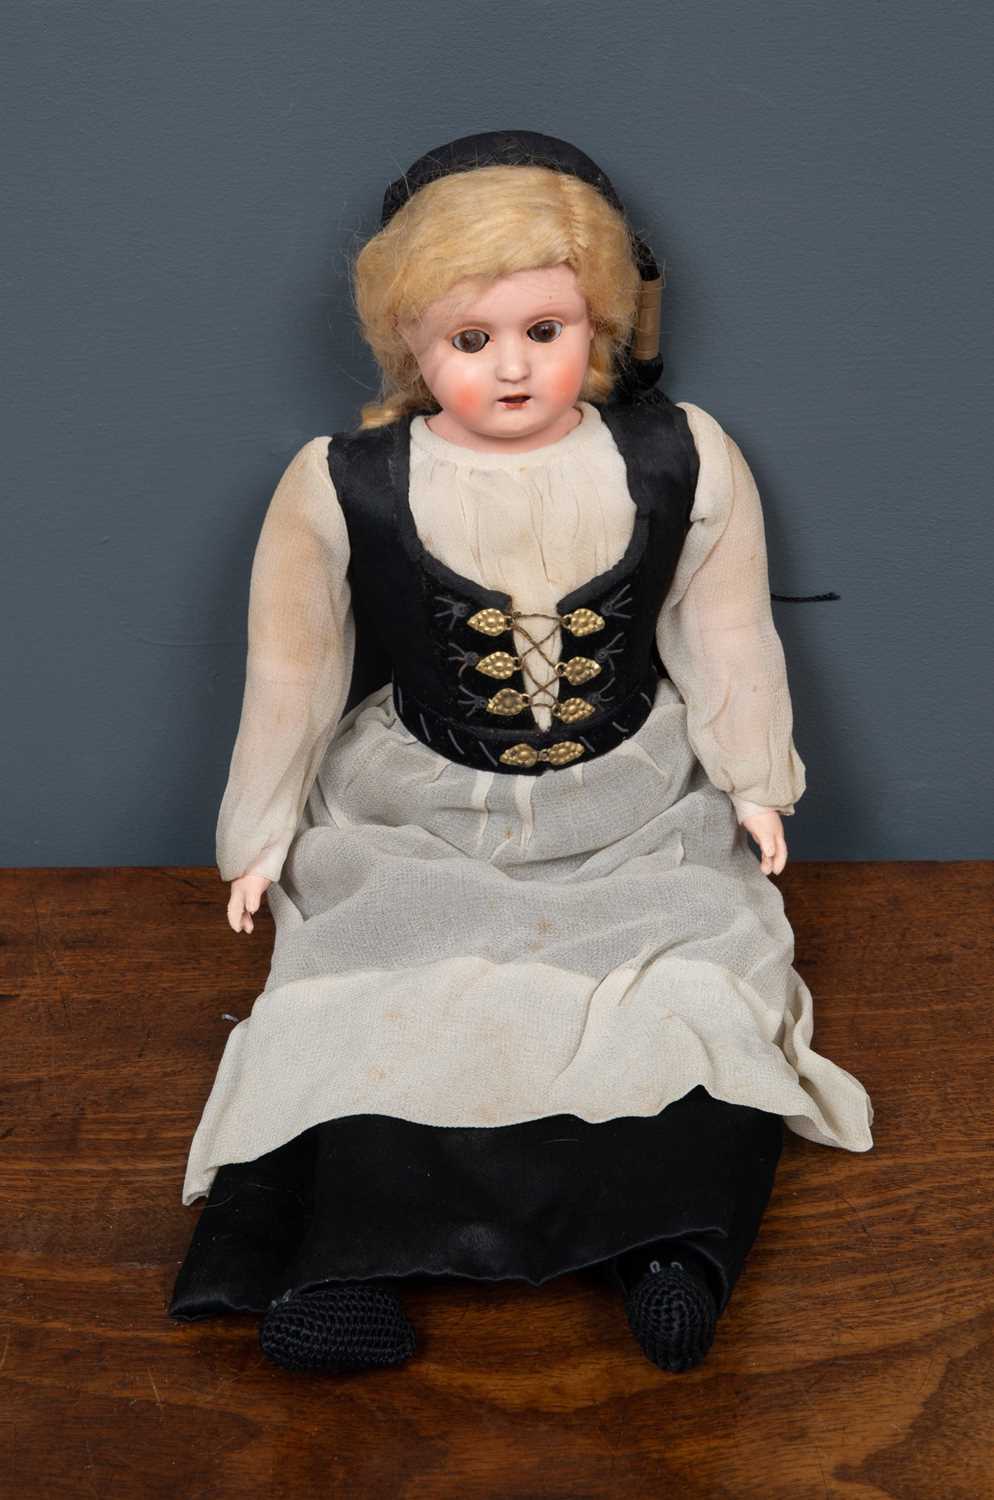 A vintage doll with rolling eyes in black and white traditional dress, plastic head and lower arms